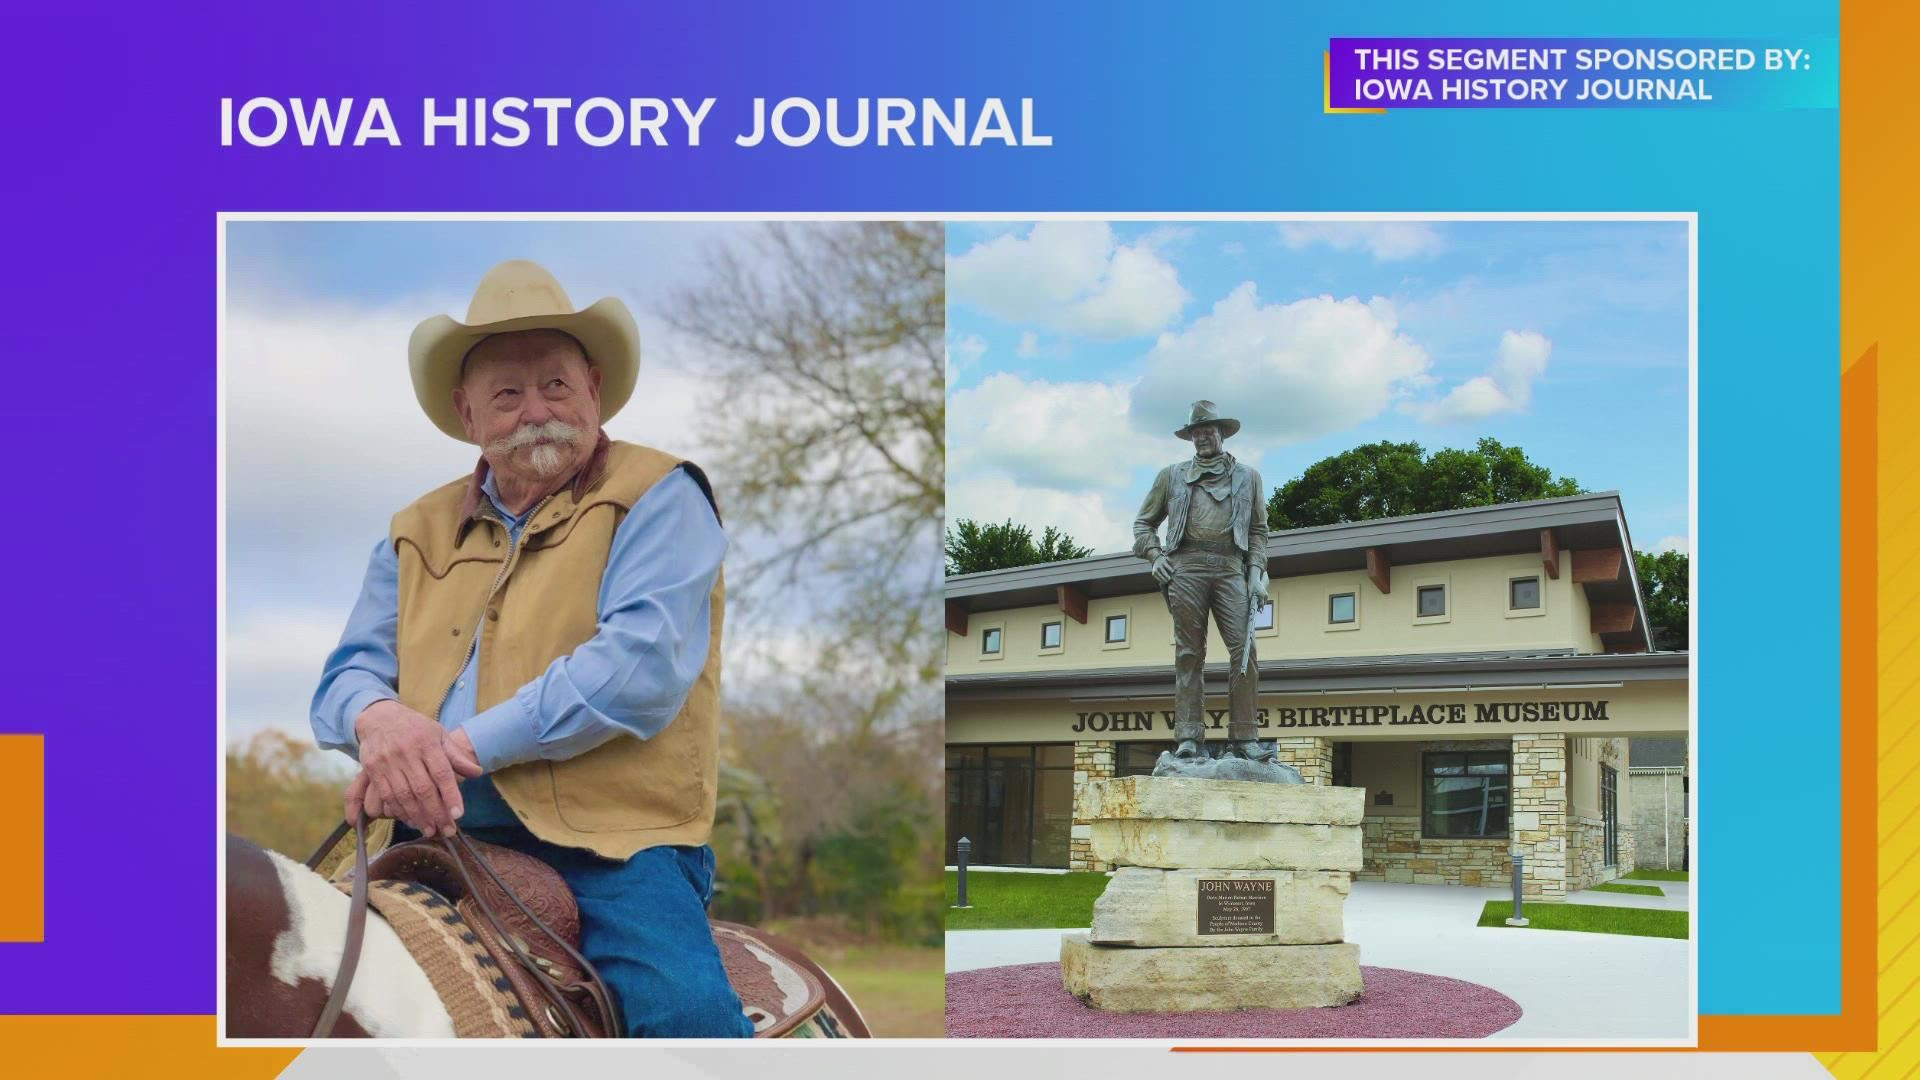 Iowa History Journal Publisher/Editor Michael Swanger gives us an overview of articles inside the May/June issue of the magazine and has NEW locations to pick it up!